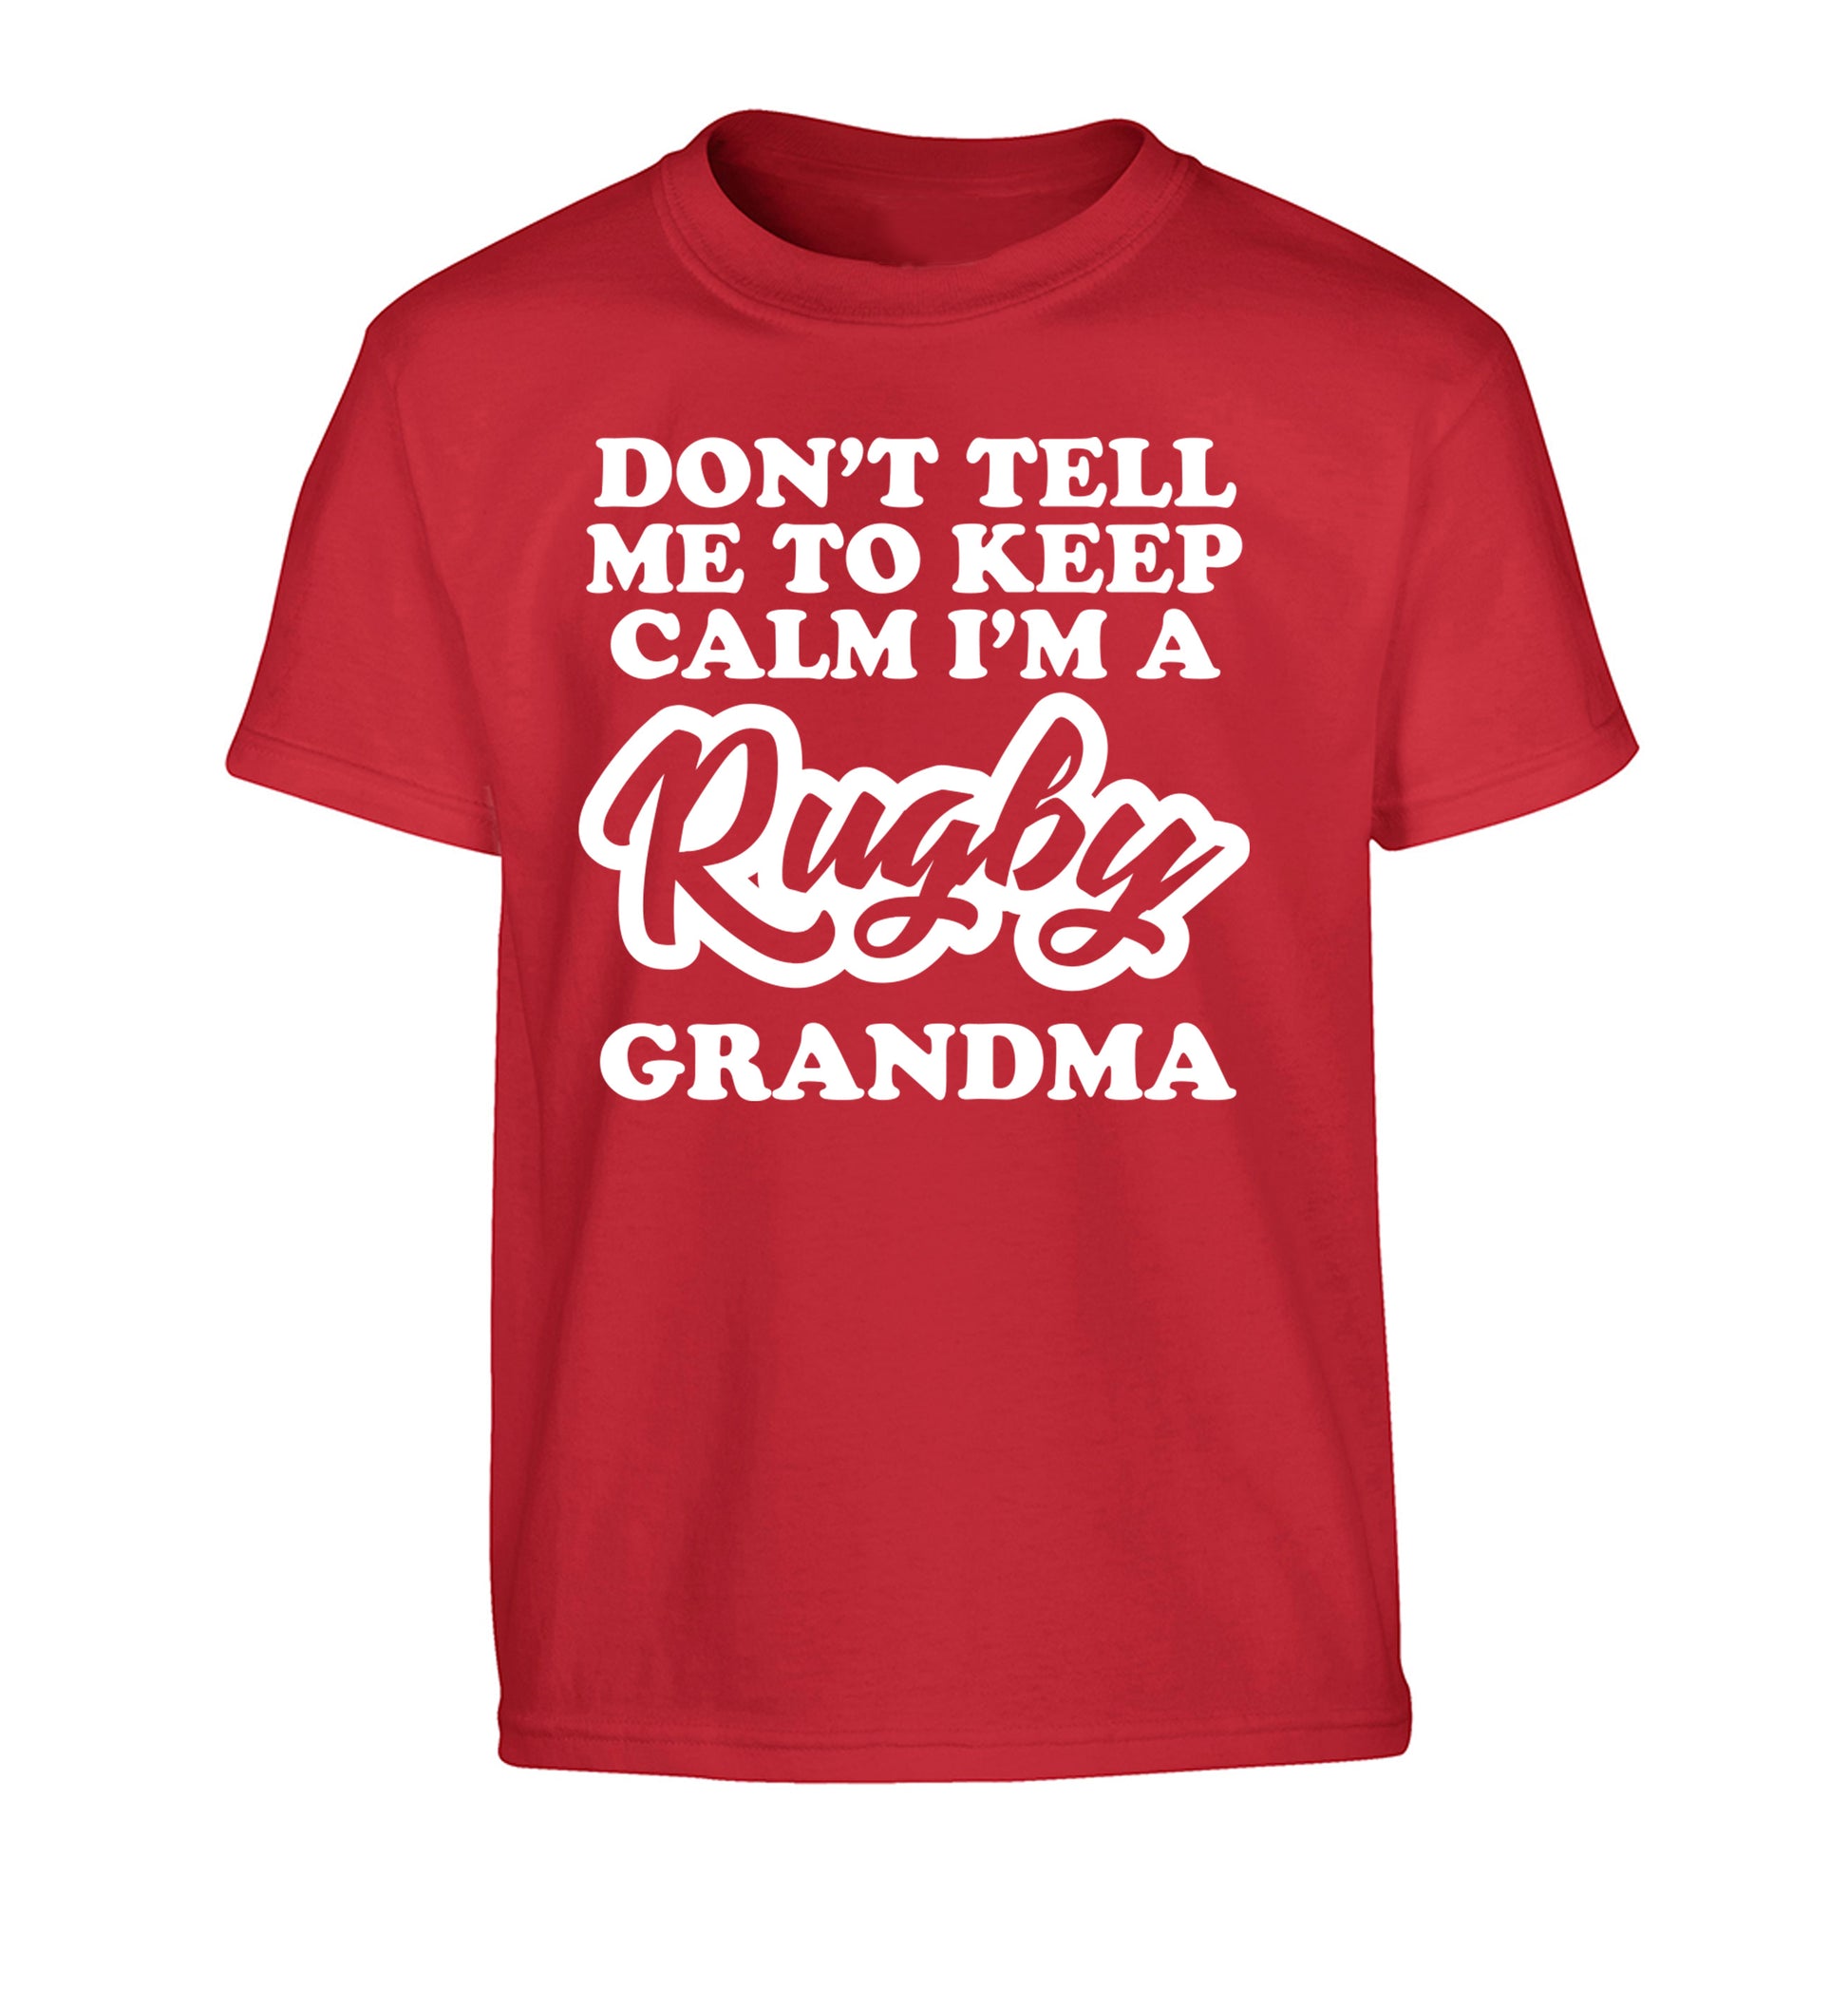 Don't tell me to keep calm I'm a rugby grandma Children's red Tshirt 12-13 Years